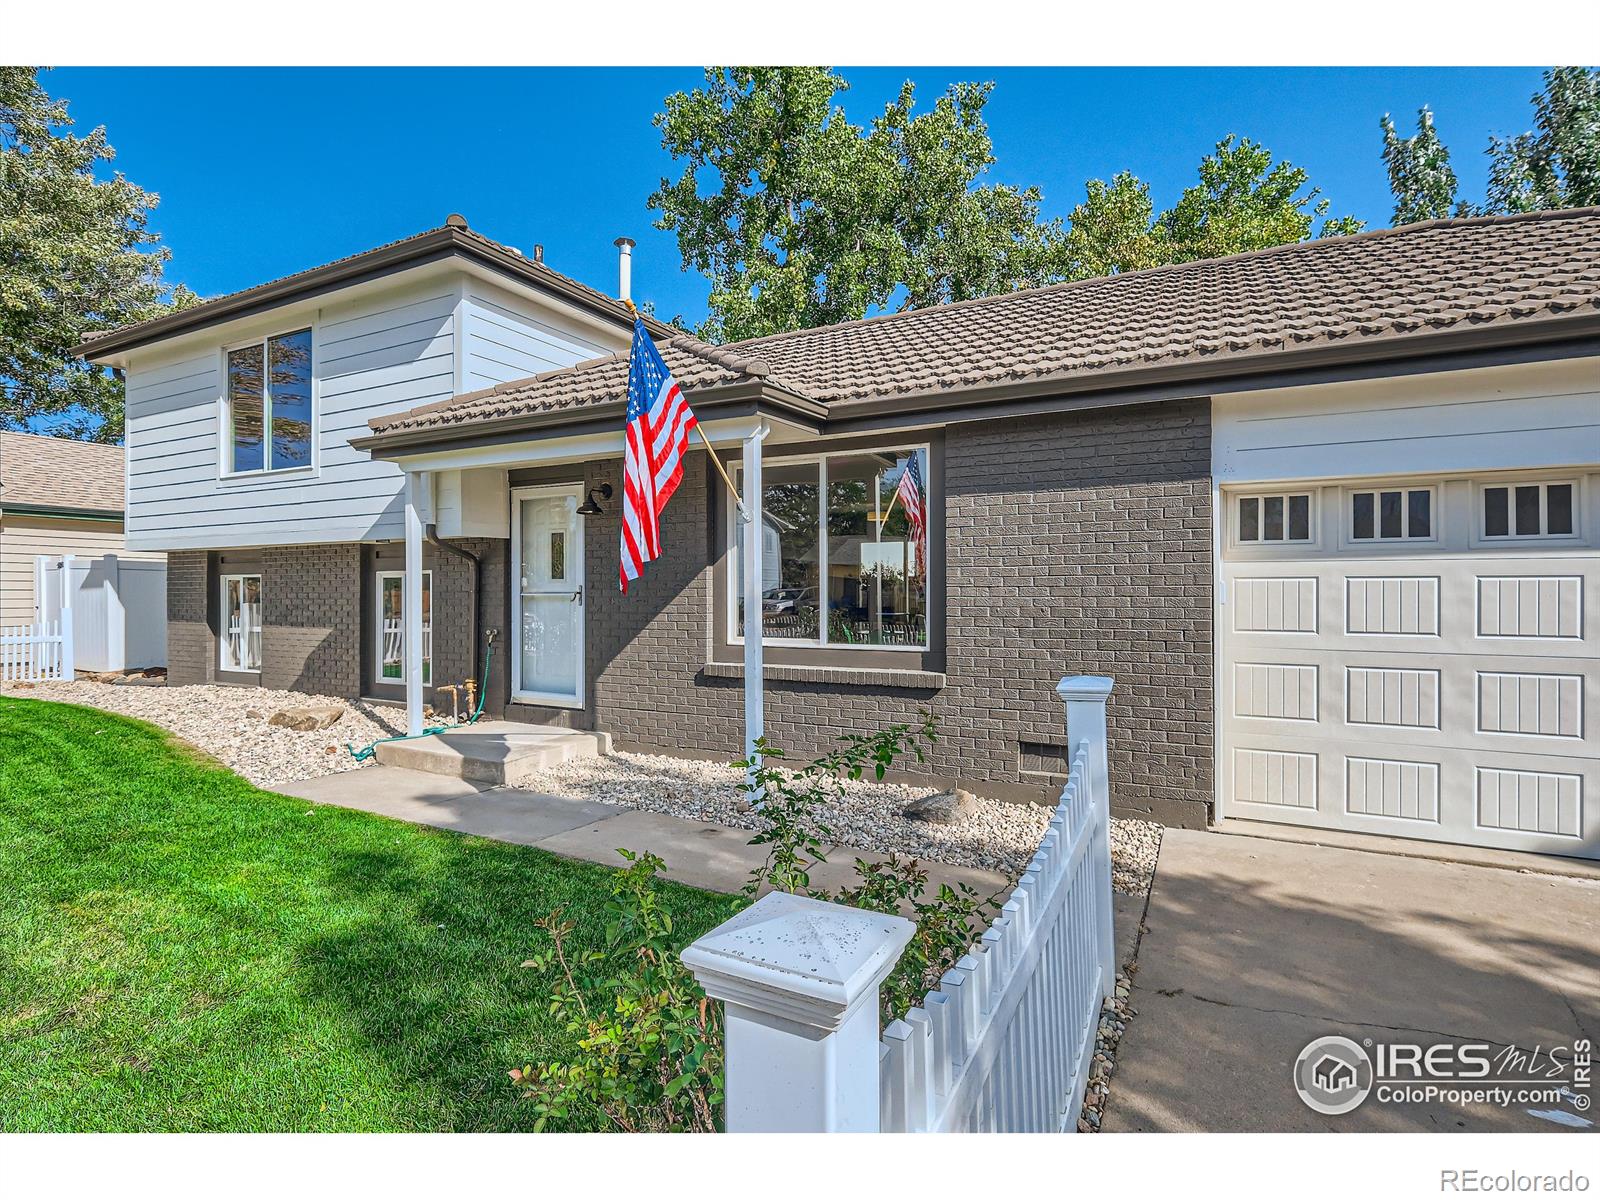 Report Image for 4  Rochester Drive,Windsor, Colorado